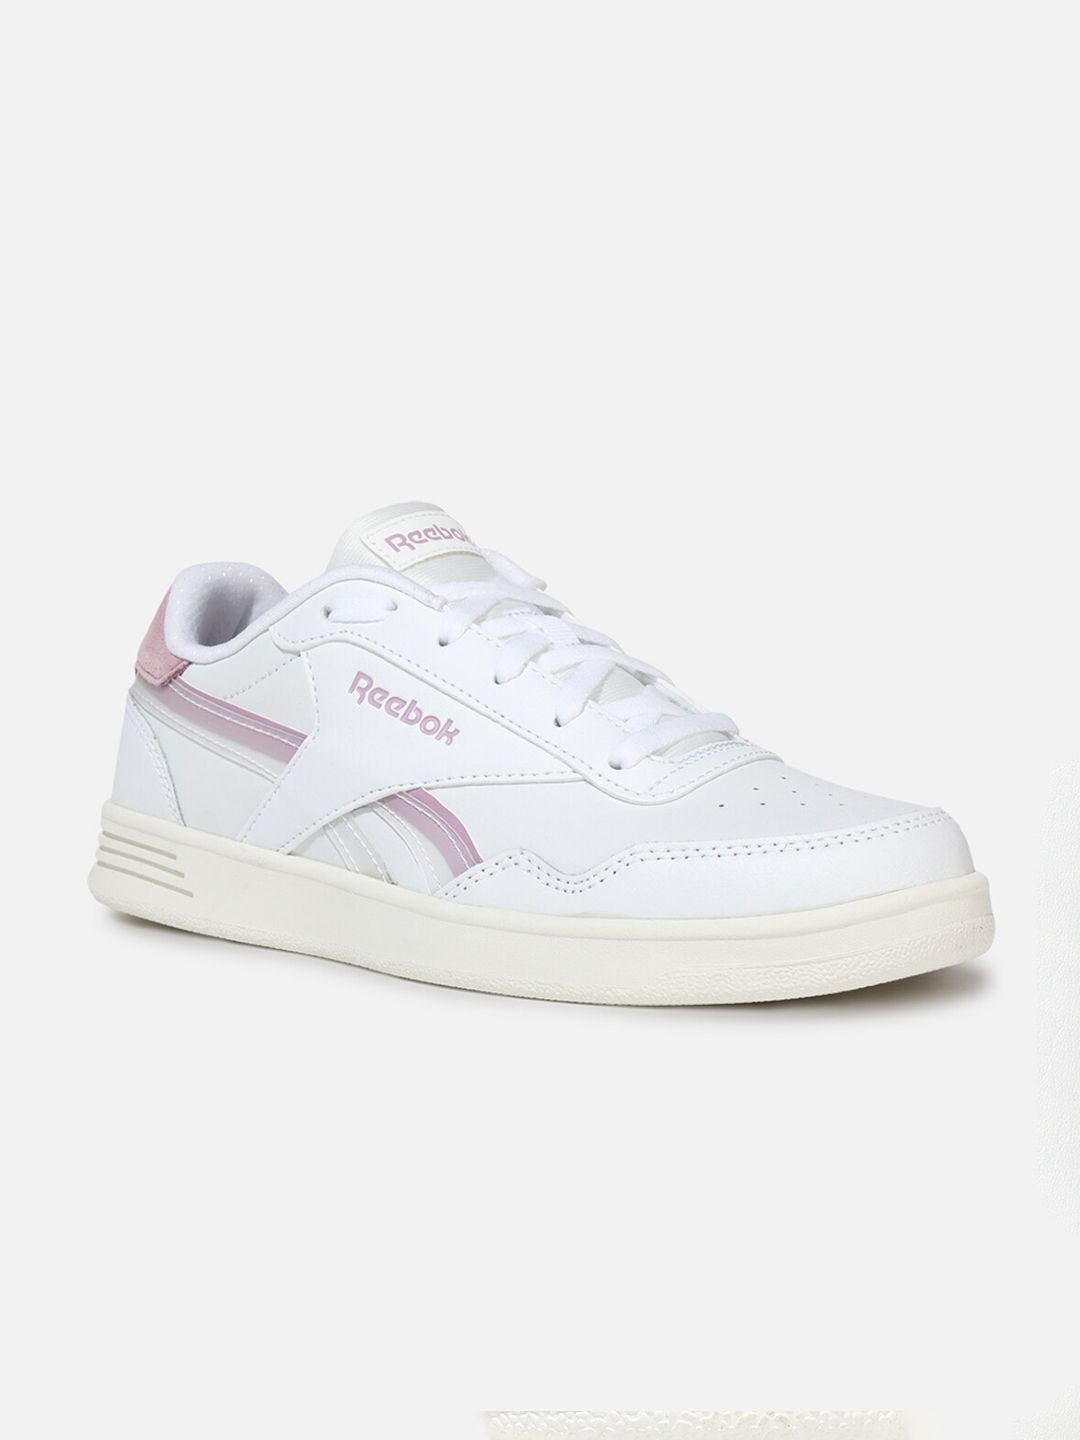 Reebok Women Rbk Classics Core Royal Techque T Shoes Price in India